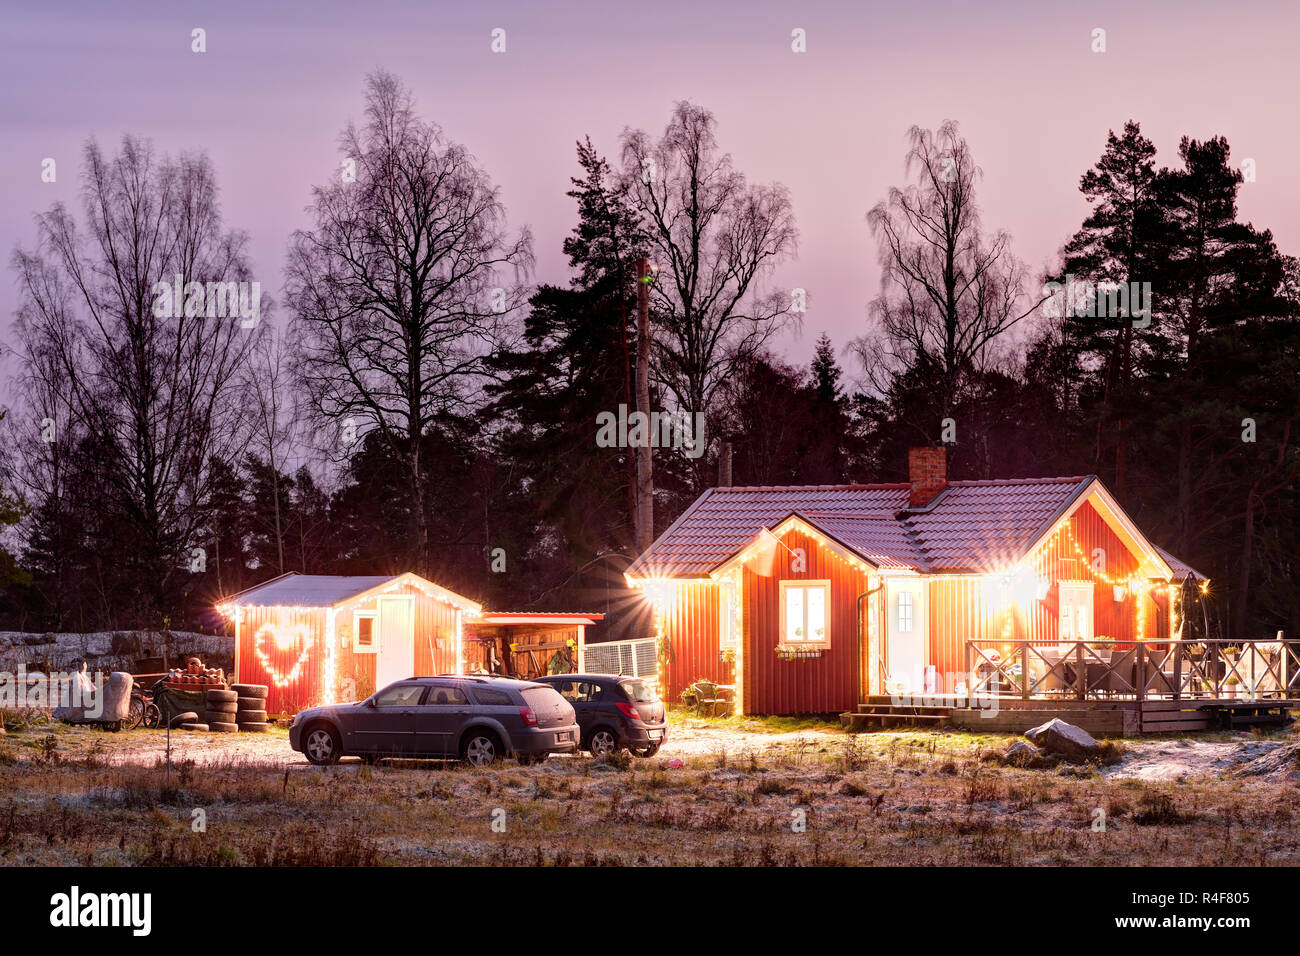 Christmas decorated and lit Swedish house at night Stock Photo